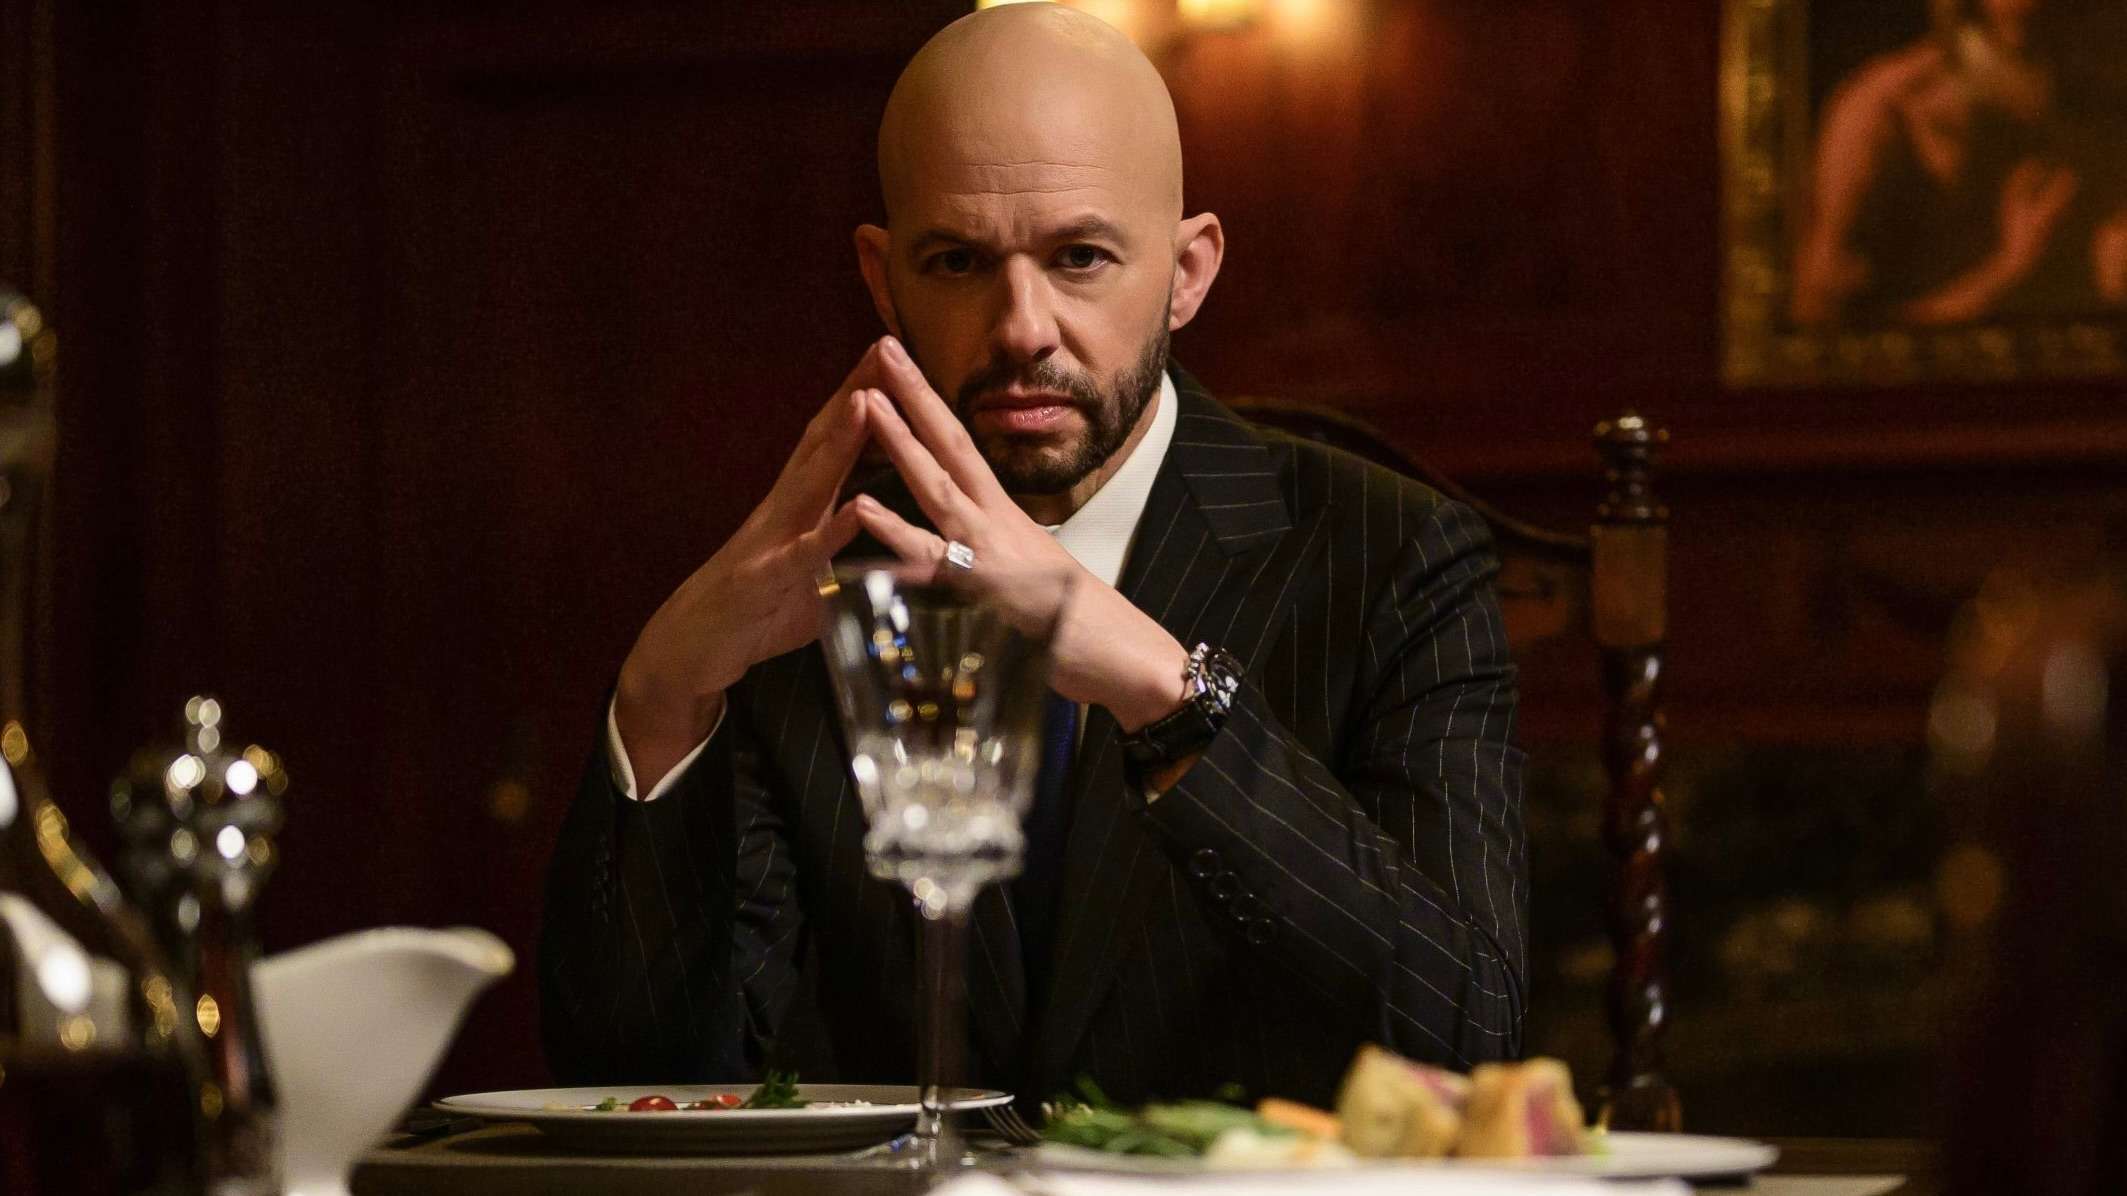 Jon Cryer as Lex Luthor in Supergirl.